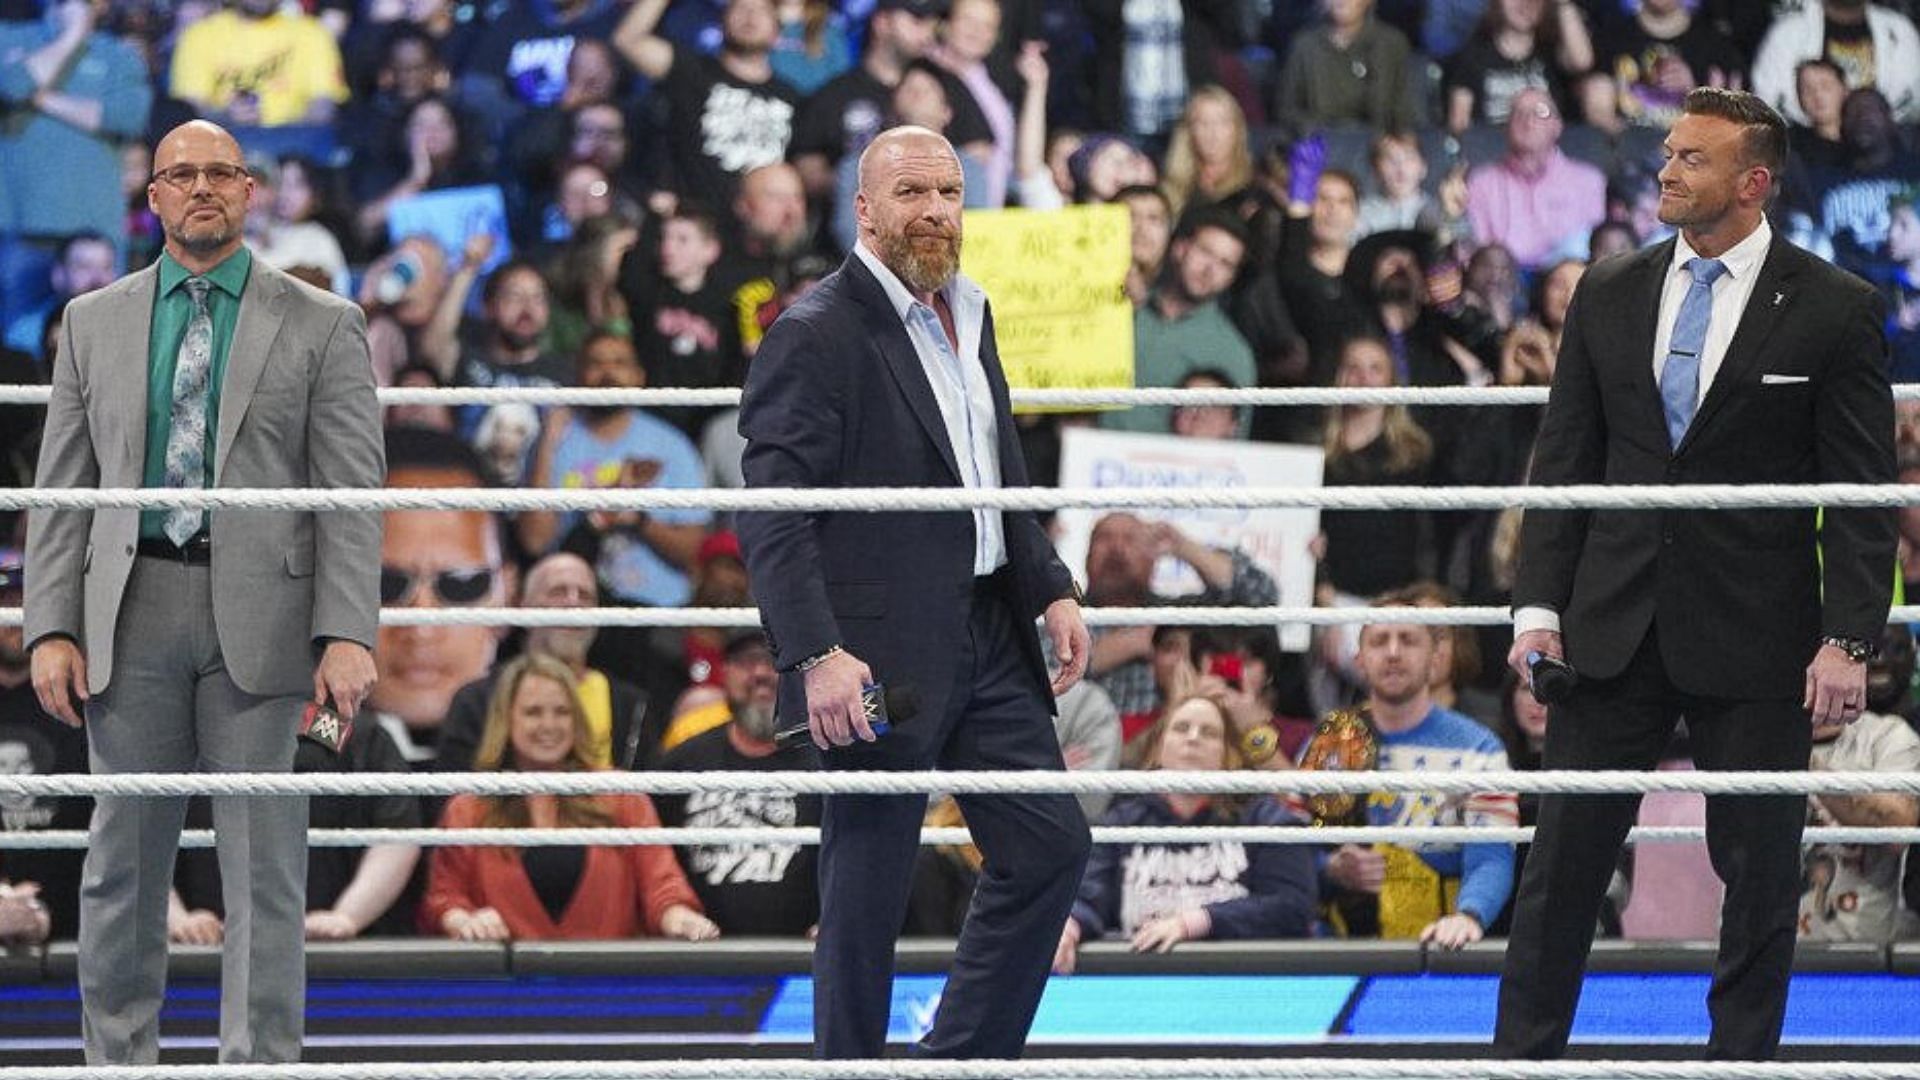 Triple H may have some big things planned for WrestleMania 